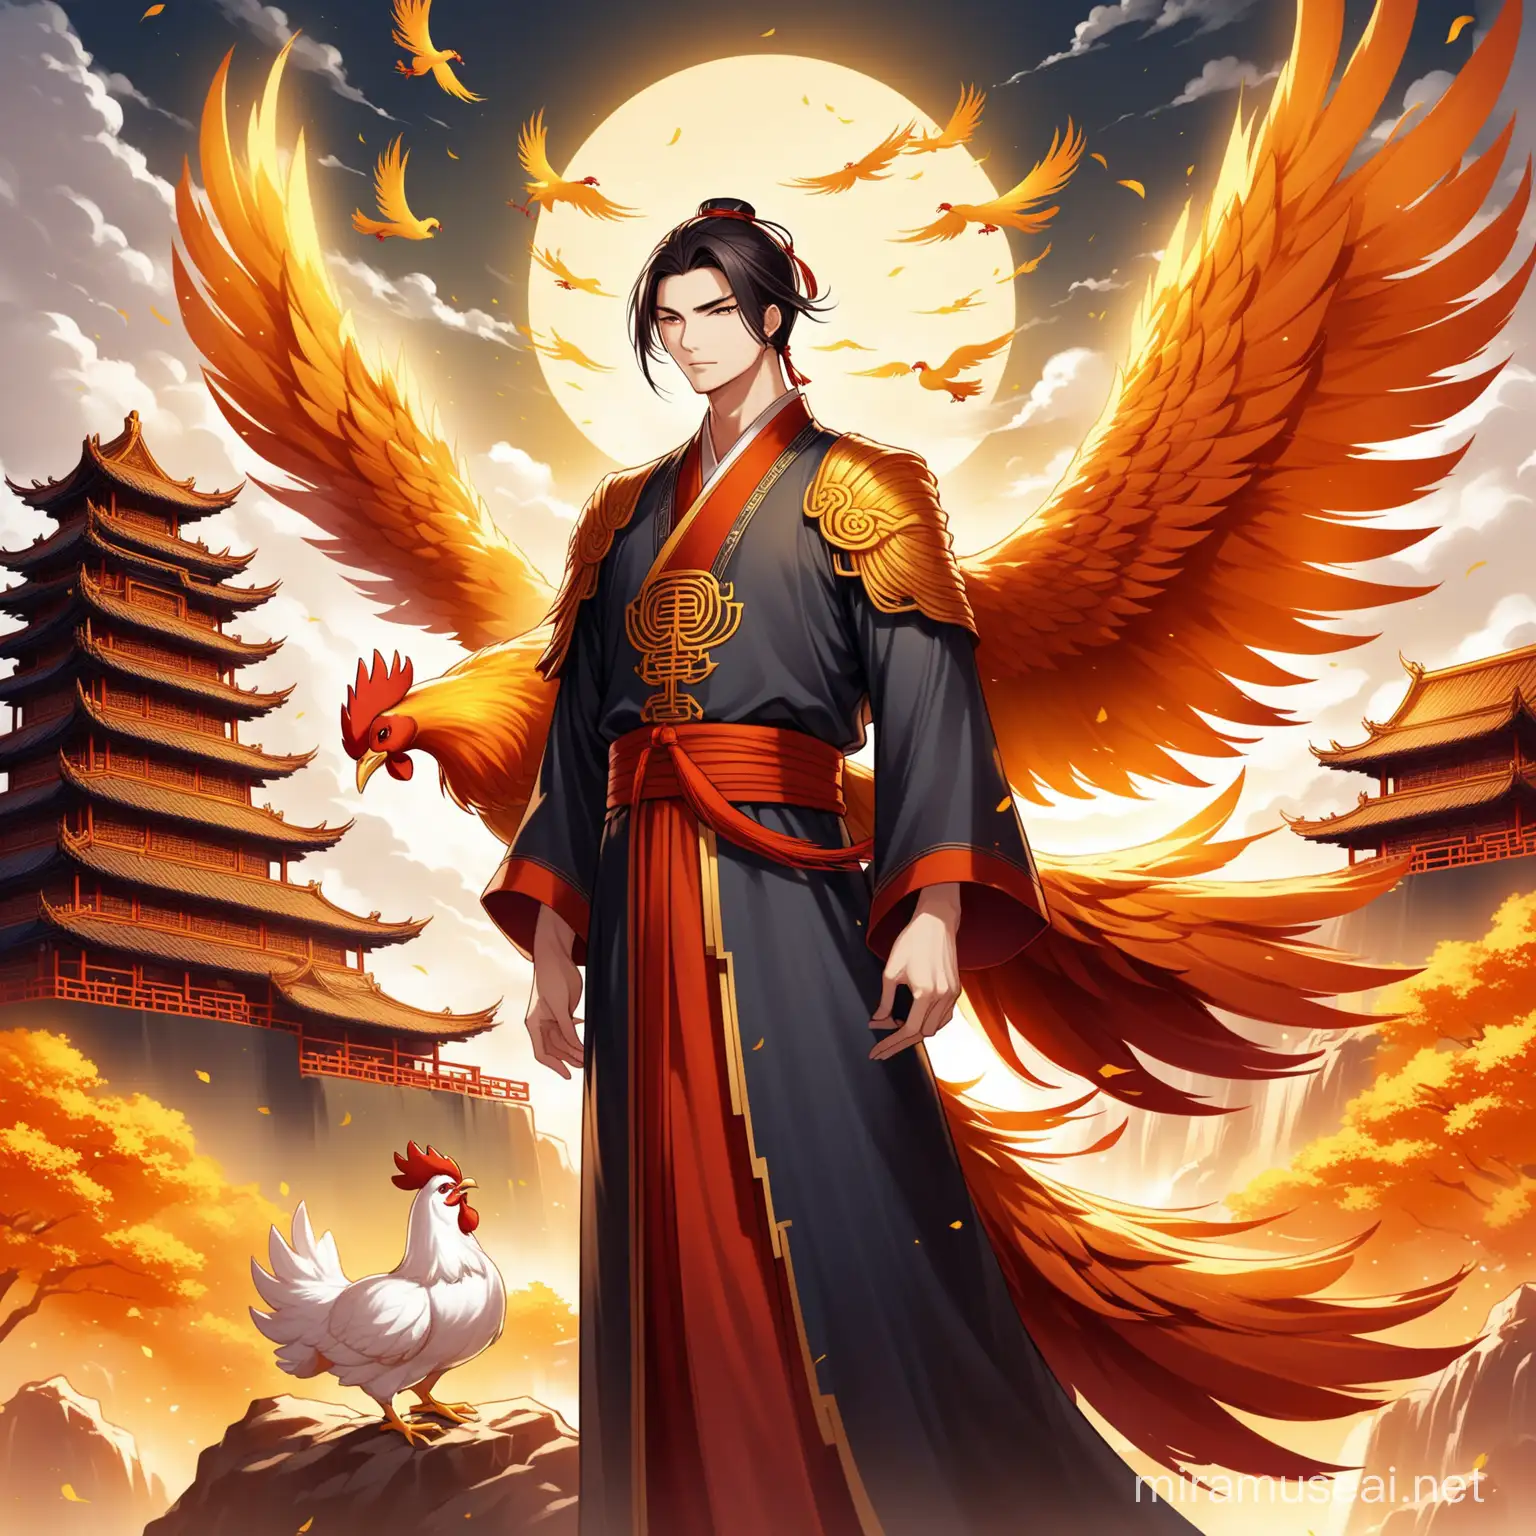 Majestic Sect Scene with Handsome Male Lead and Mythical Phoenix Chicken